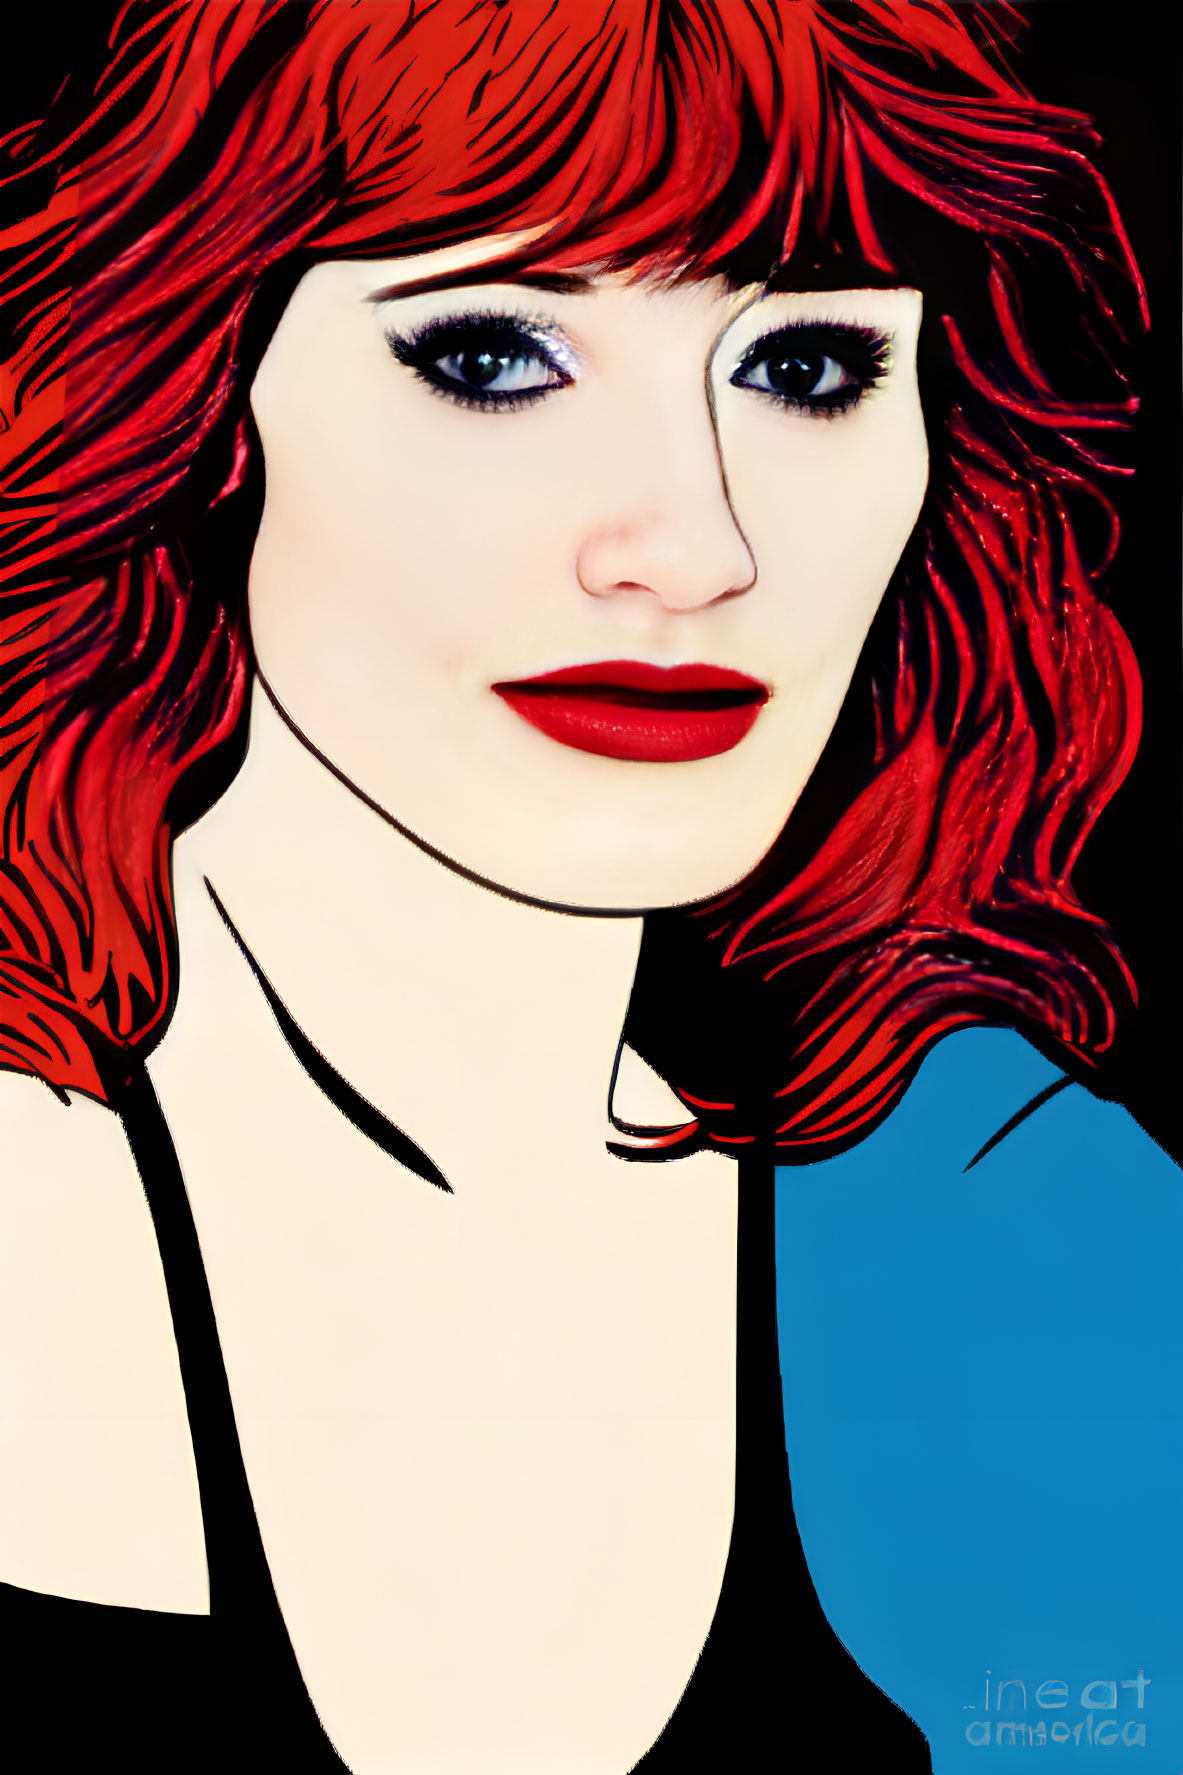 Stylized portrait of a woman with red hair and blue eyes